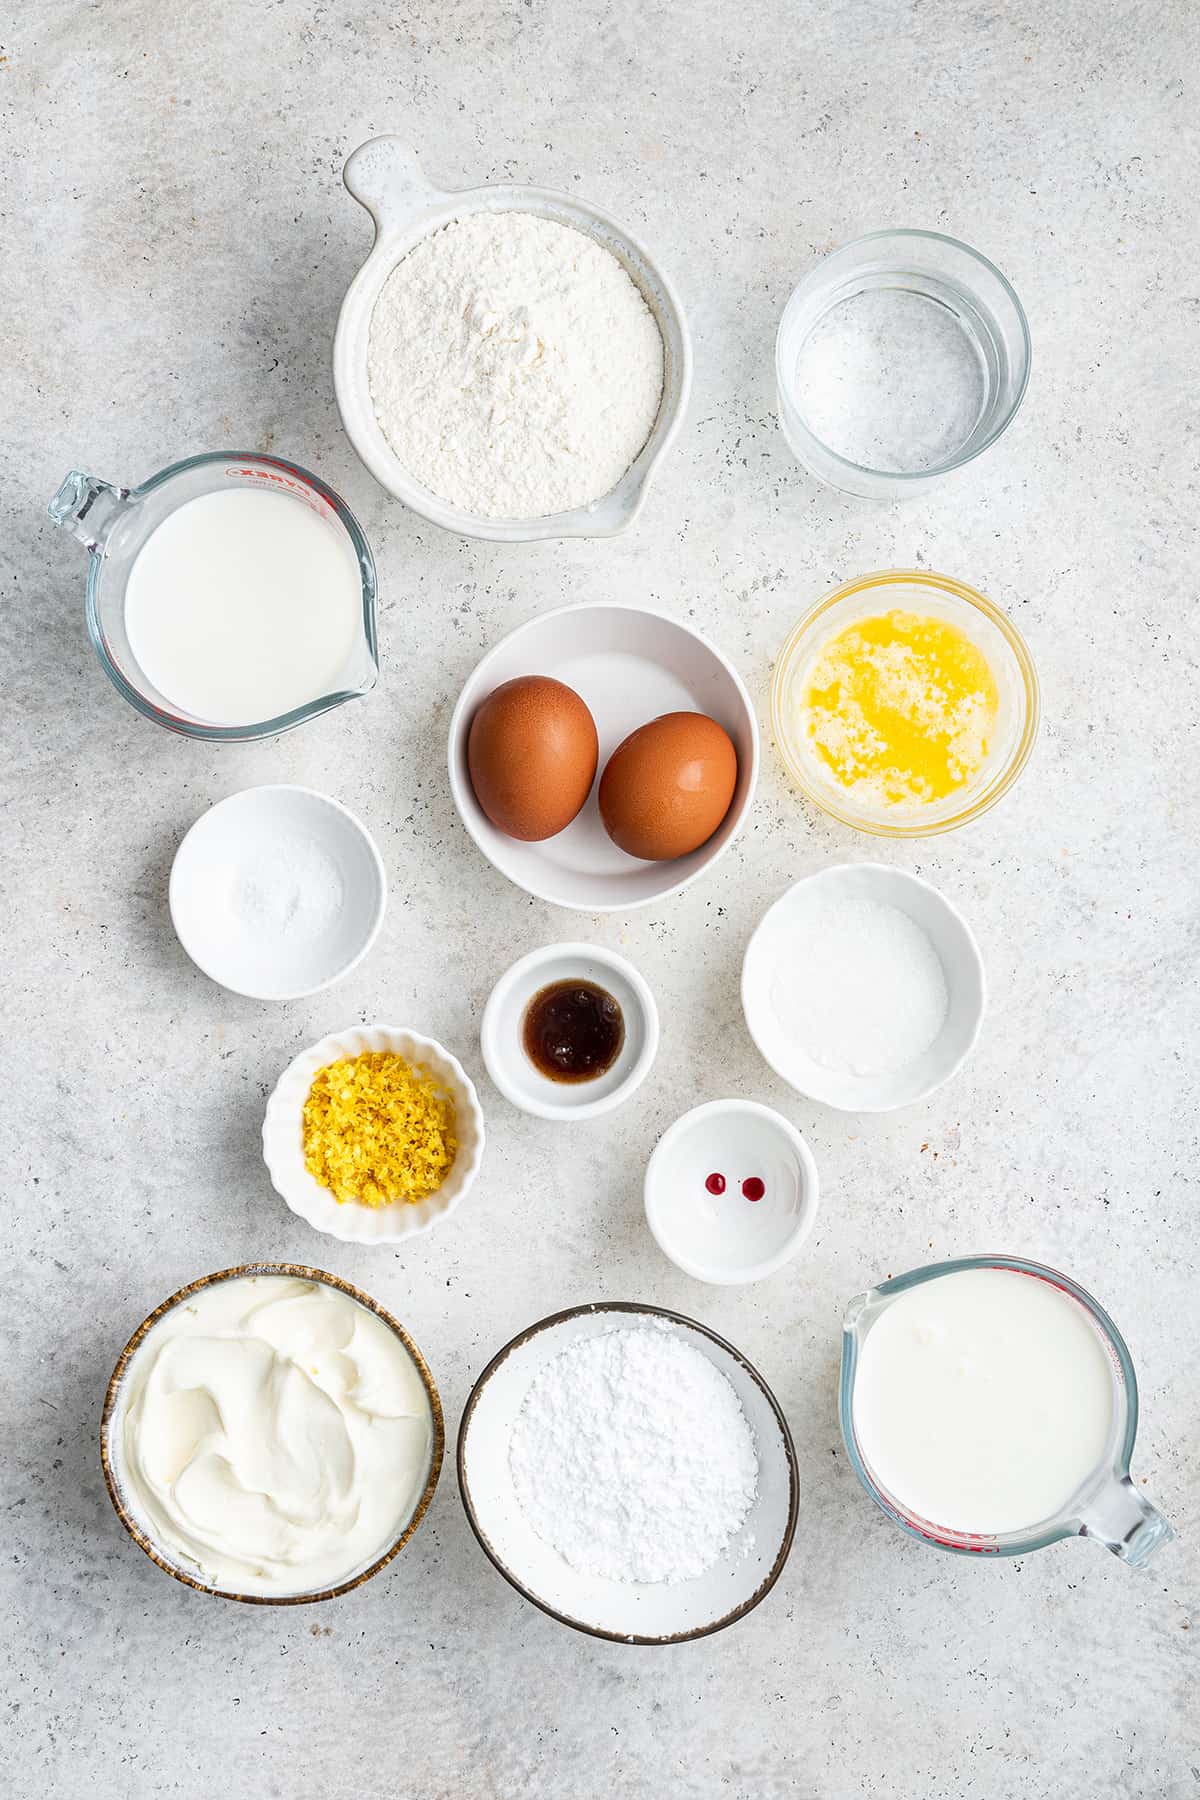 Overhead view of the ingredients needed for crepe cake: a bowl of flour, a glass of water, a bowl of milk, a bowl of eggs, a bowl of melted butter, a bowl of vanilla, a bowl of lemon zest, a bowl of sugar, a bowl of powdered sugar, a bowl of salt, a bowl of heavy cream, a bowl of mascarpone, and a bowl of red food dye.